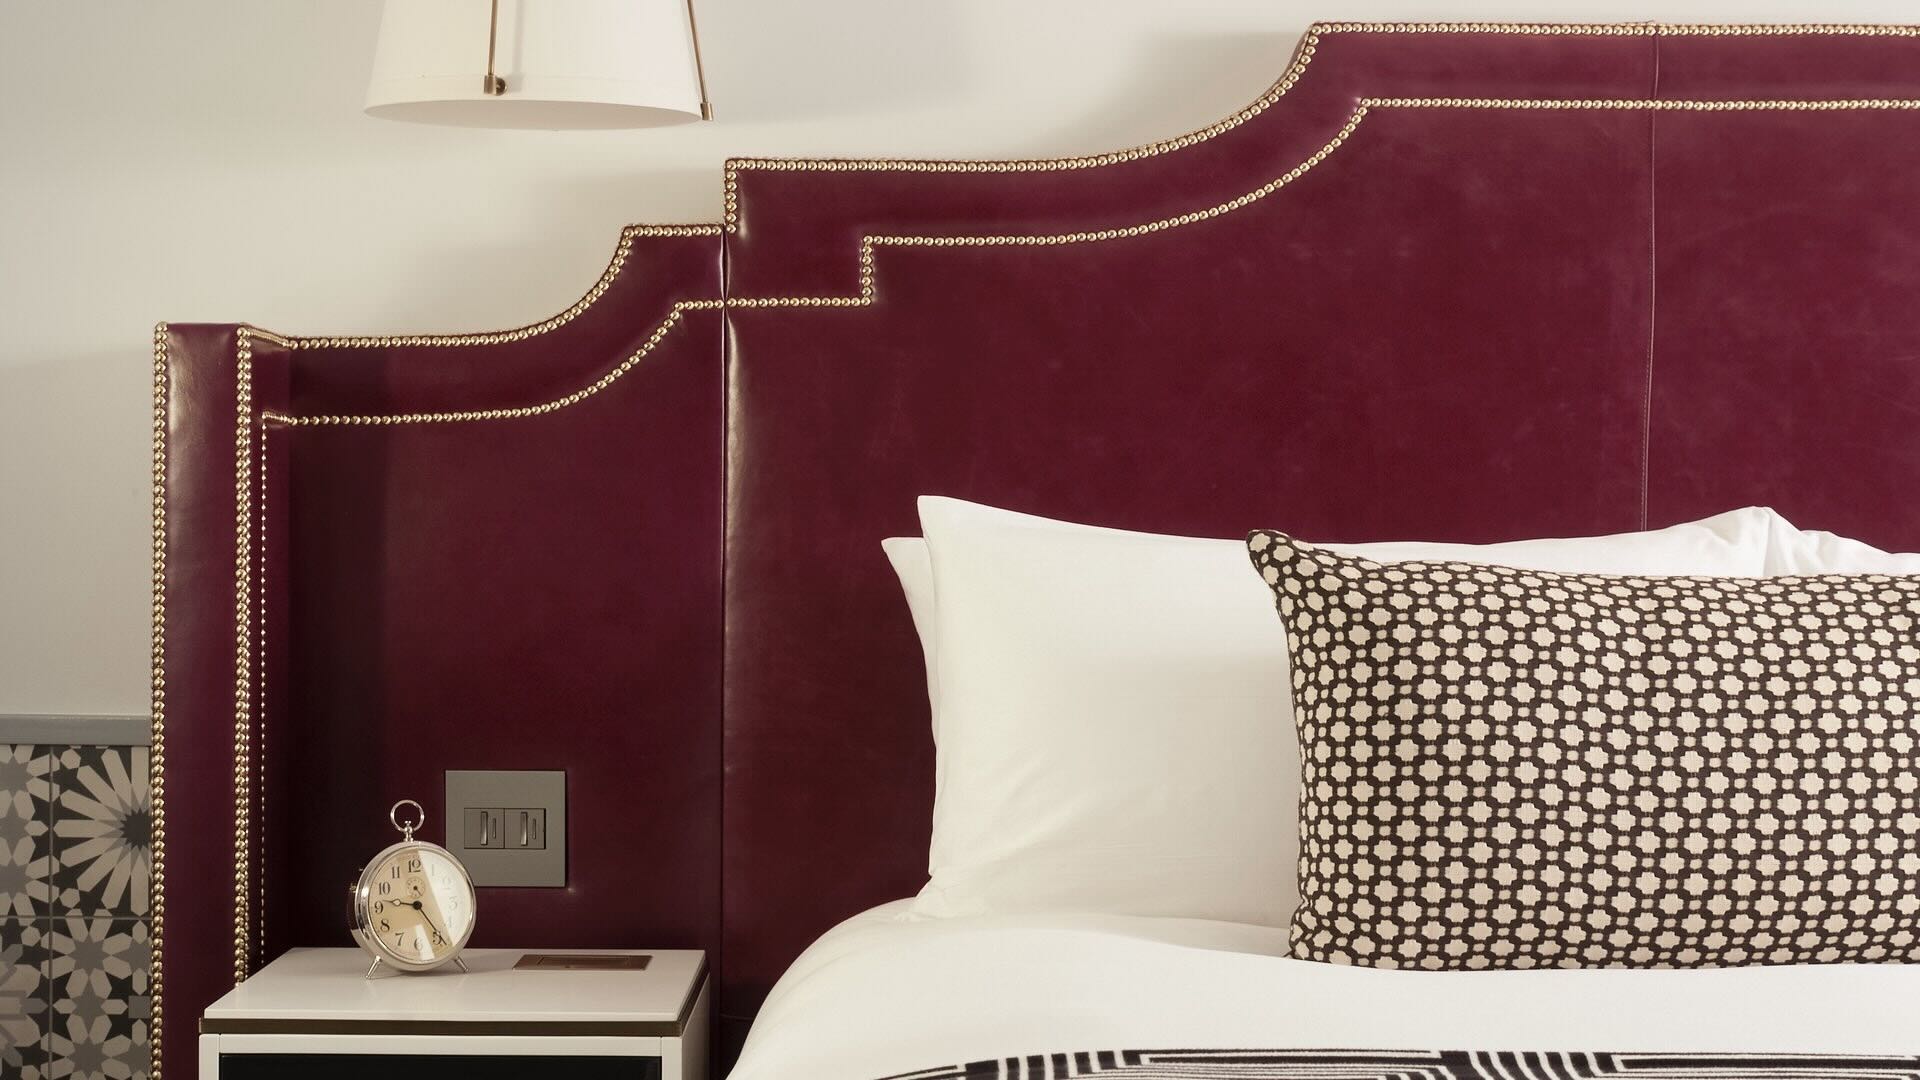 Hotel Californian, bed and headboard in red copy